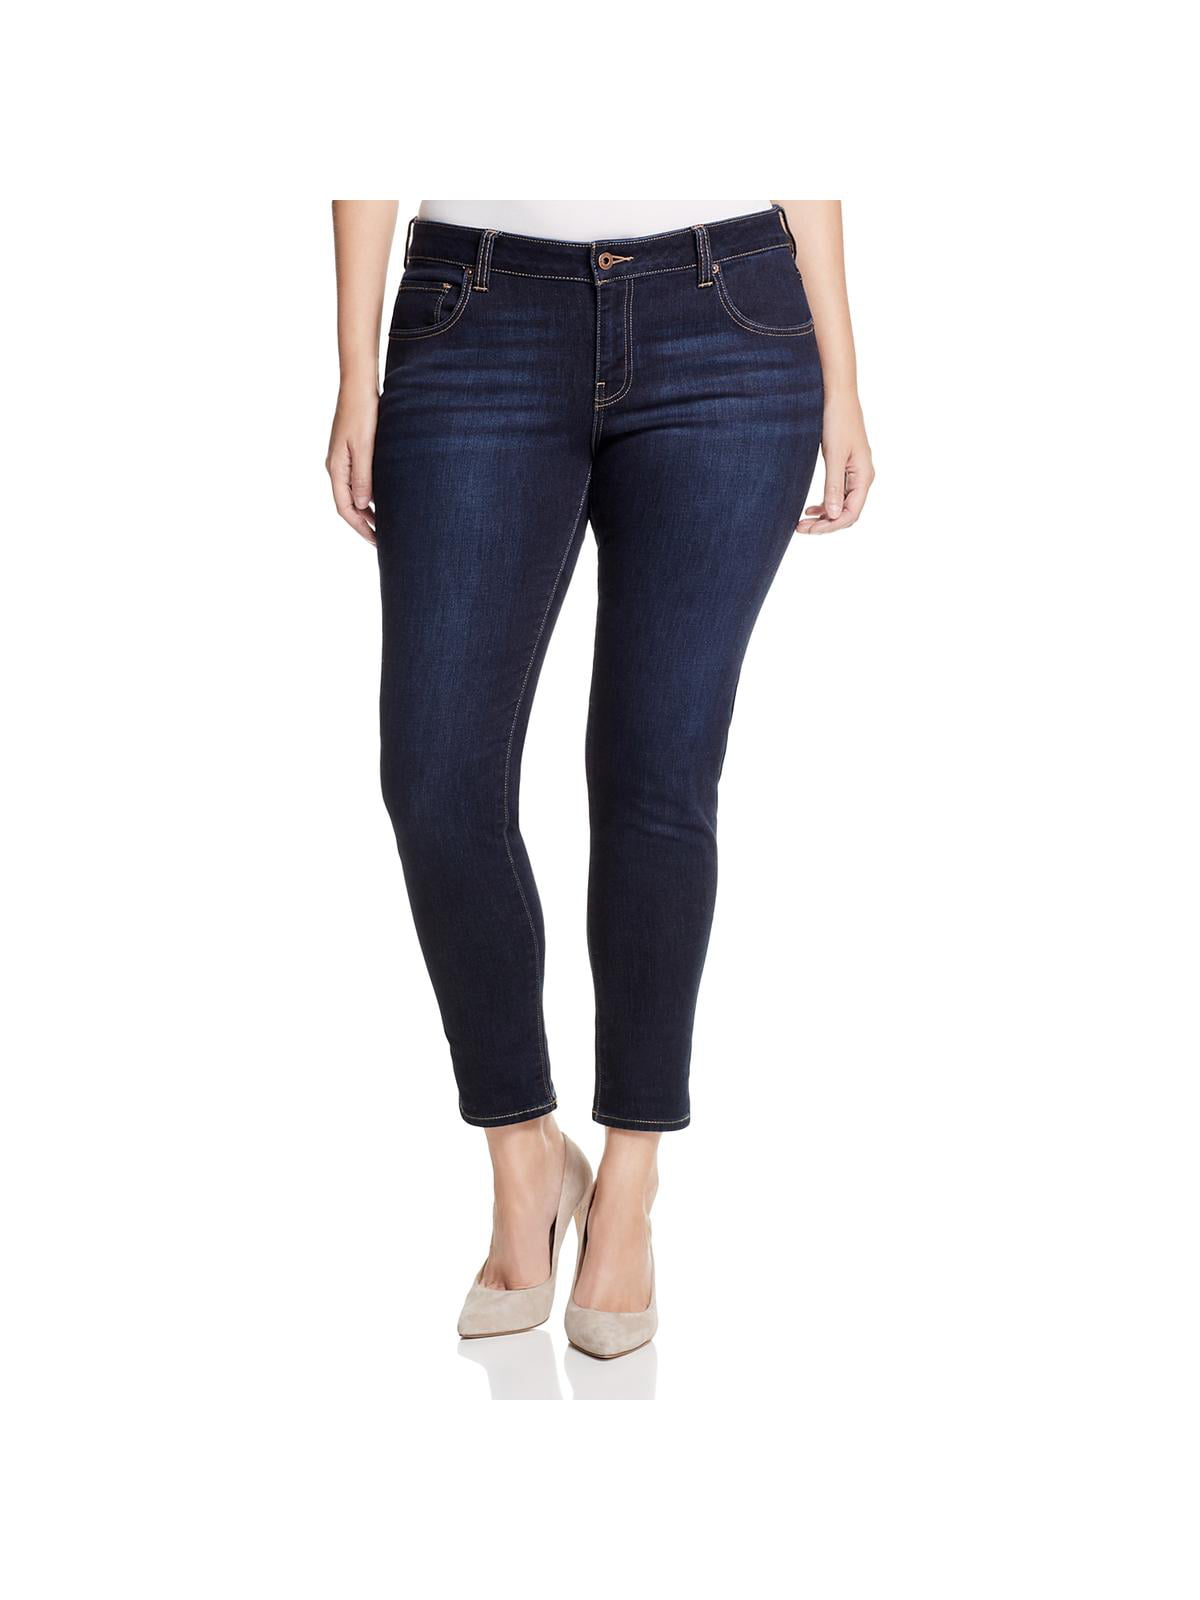 lucky brand jeans for curvy fit